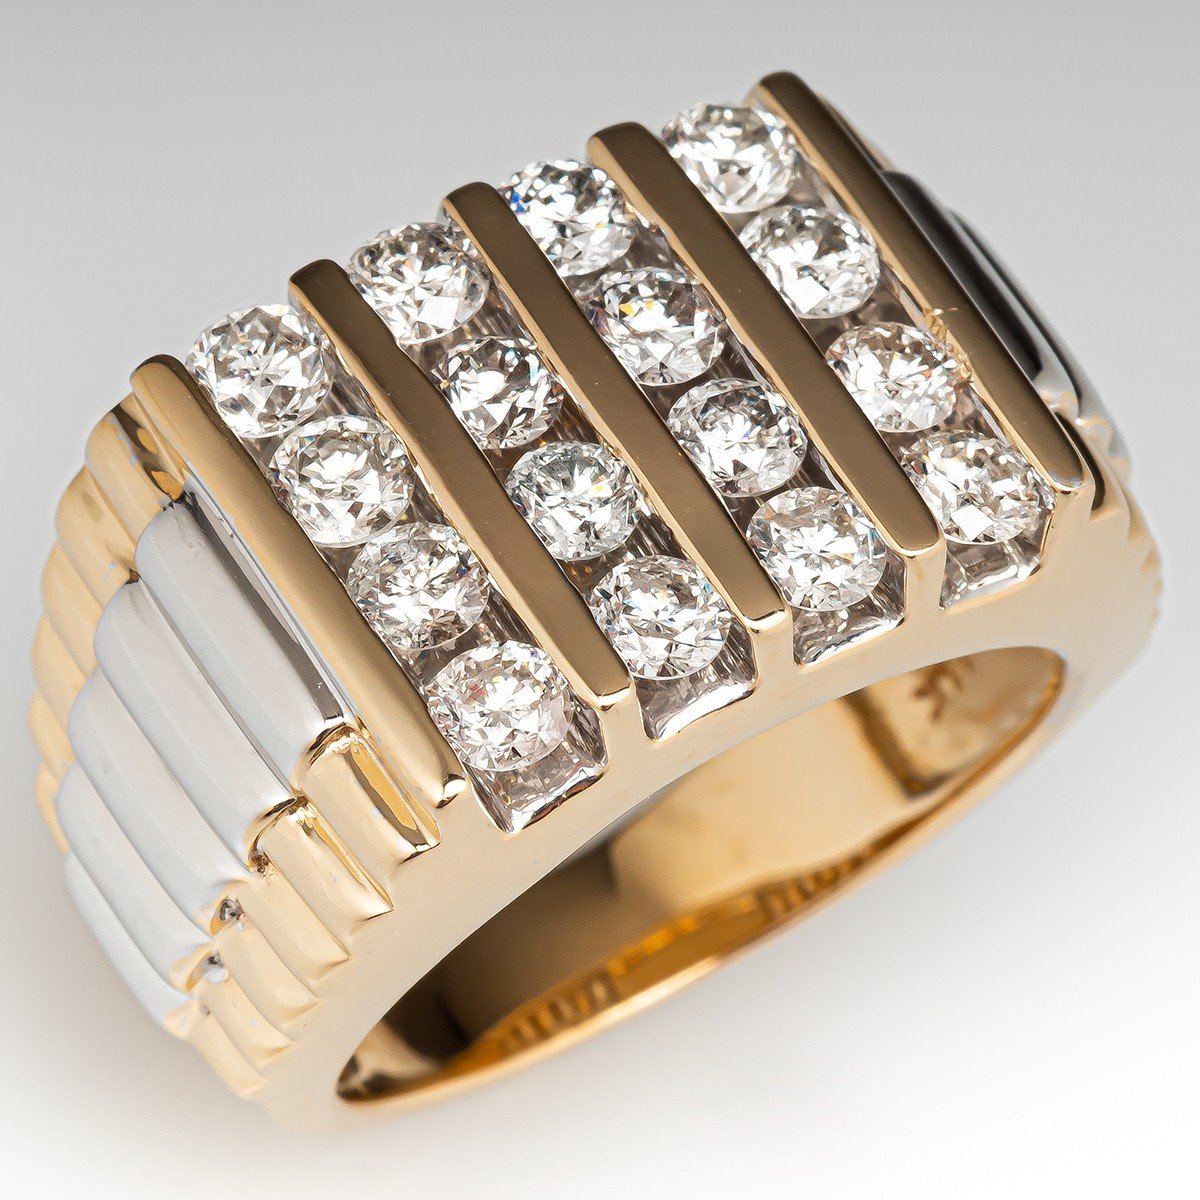 Rylos 14K Yellow Gold Designer Men's Ring, adorned with a stunning 1/4  Carat of Diamonds. Explore our exclusive collection of Men's Gold Rings,  available in sizes 6-13|Amazon.com